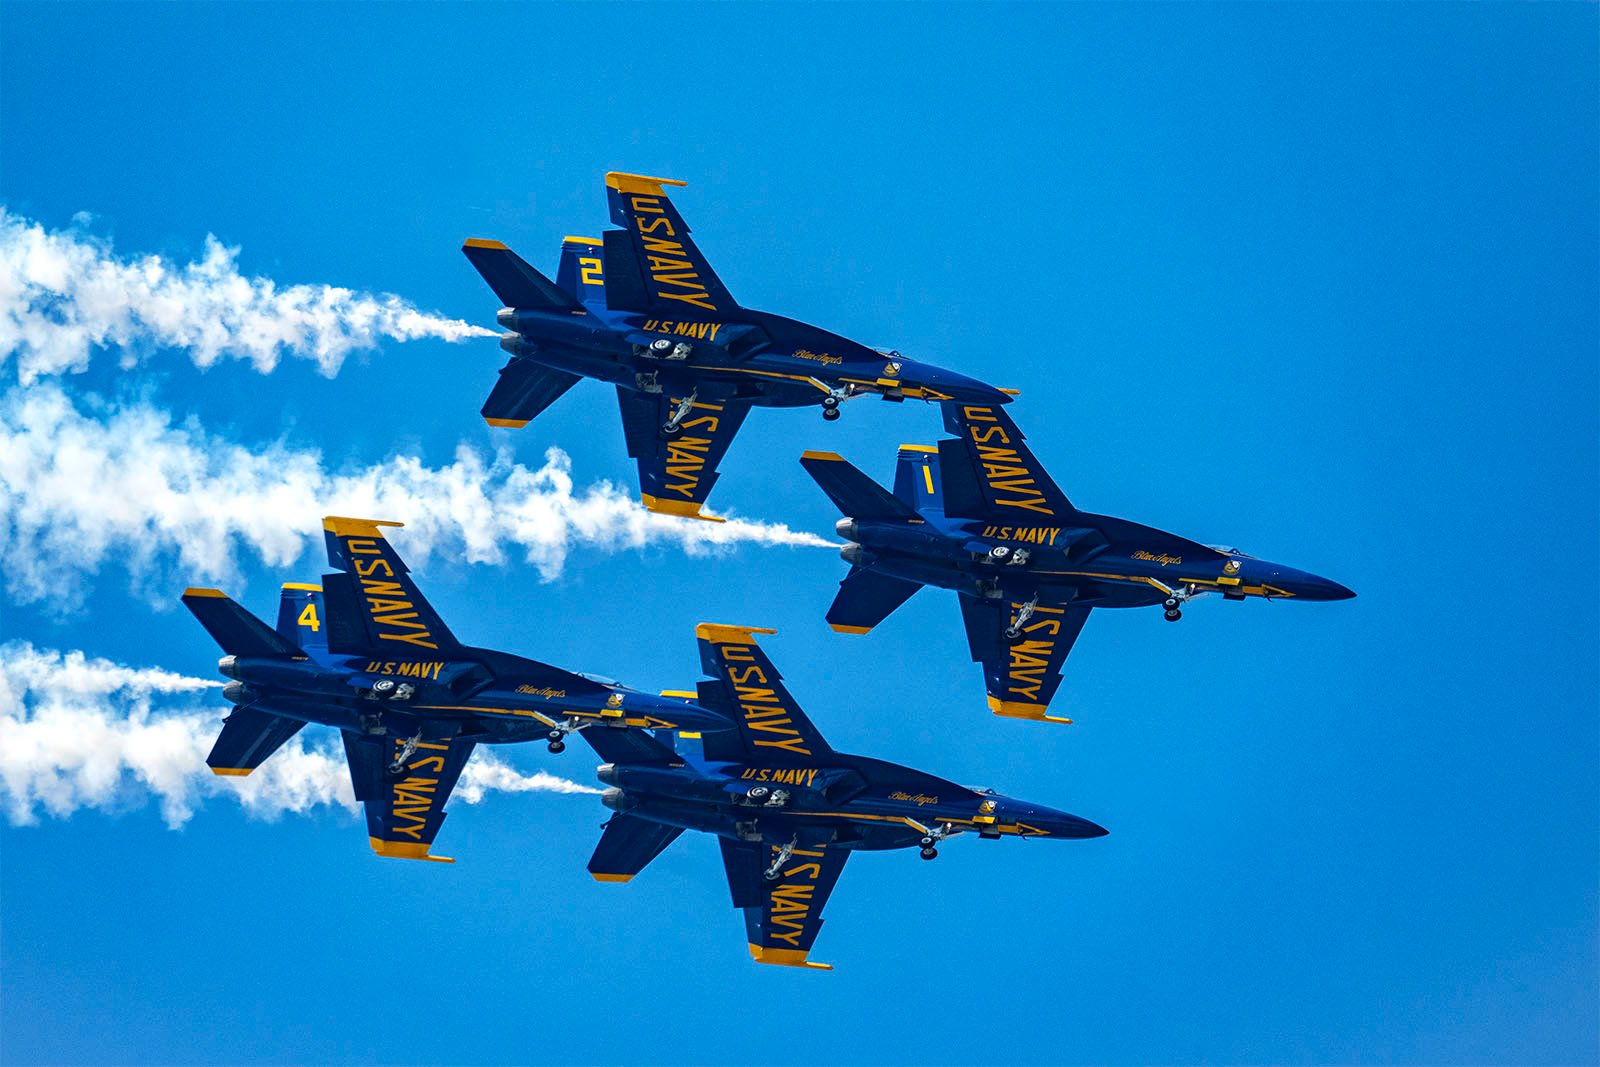 Four U.S. Navy Blue Angels jets fly in a tight formation against a clear blue sky. The planes trail white smoke and are painted navy blue with yellow accents, with "U.S. Navy" written prominently on the undersides of the wings and fuselage.